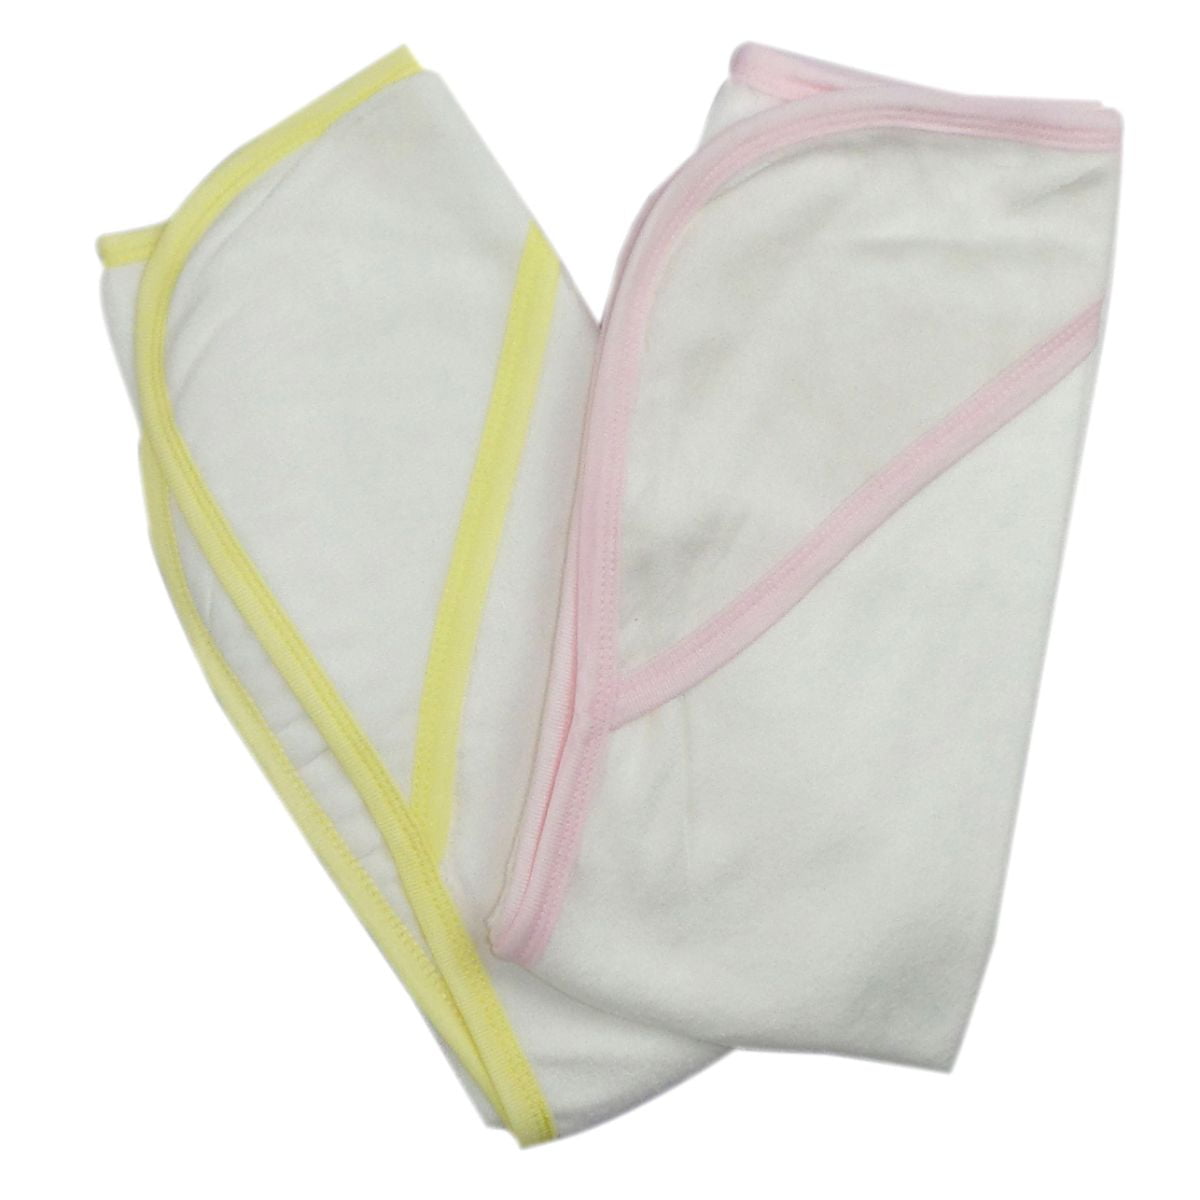 021b-pink-021b-yellow Infant Hooded Bath Towel, Pink & Red - Pack Of 2